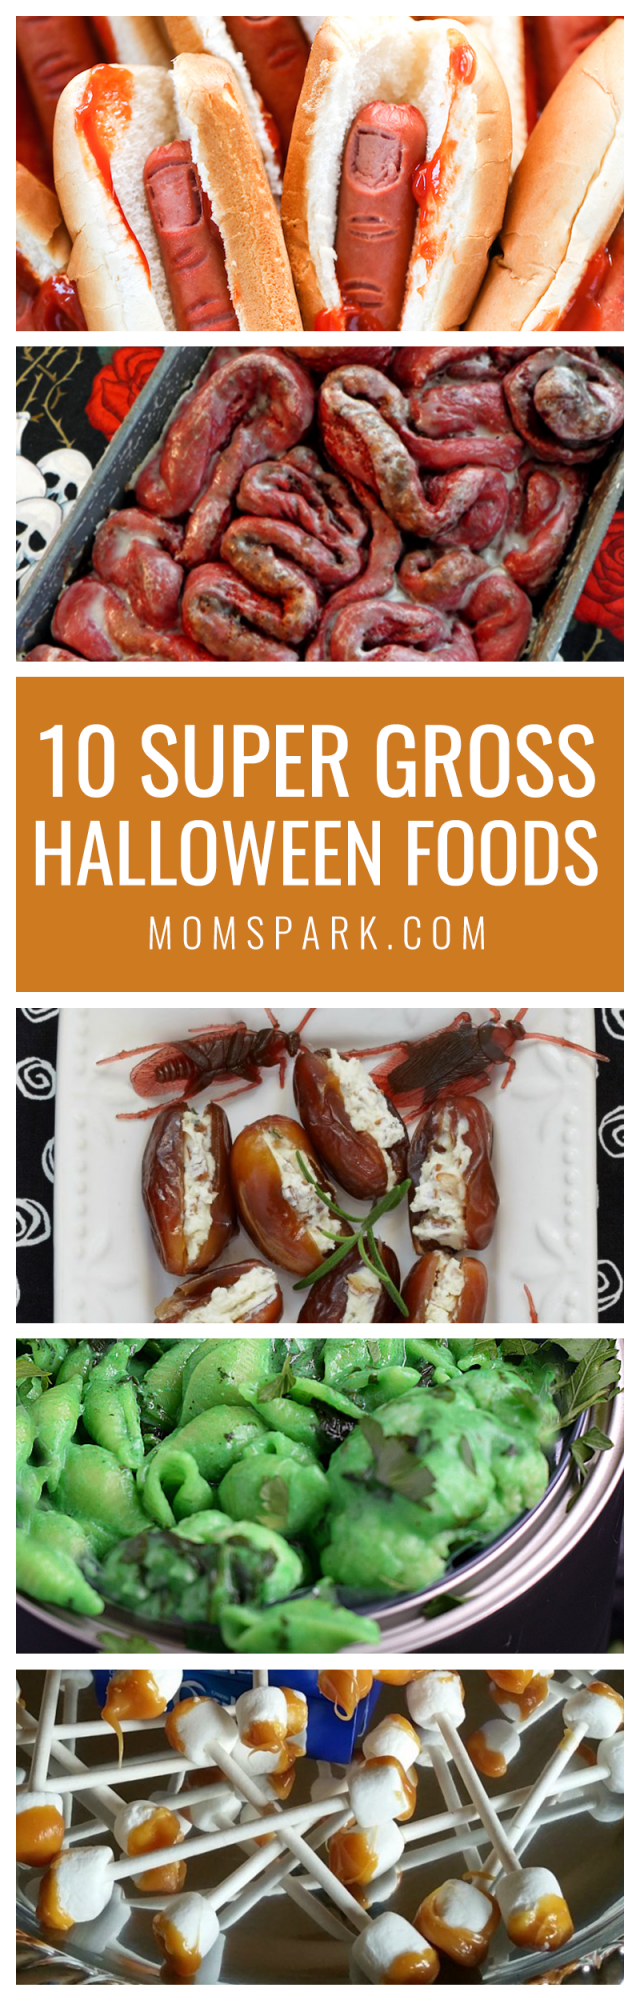 10 Halloween Food Recipes that Will Gross You Out